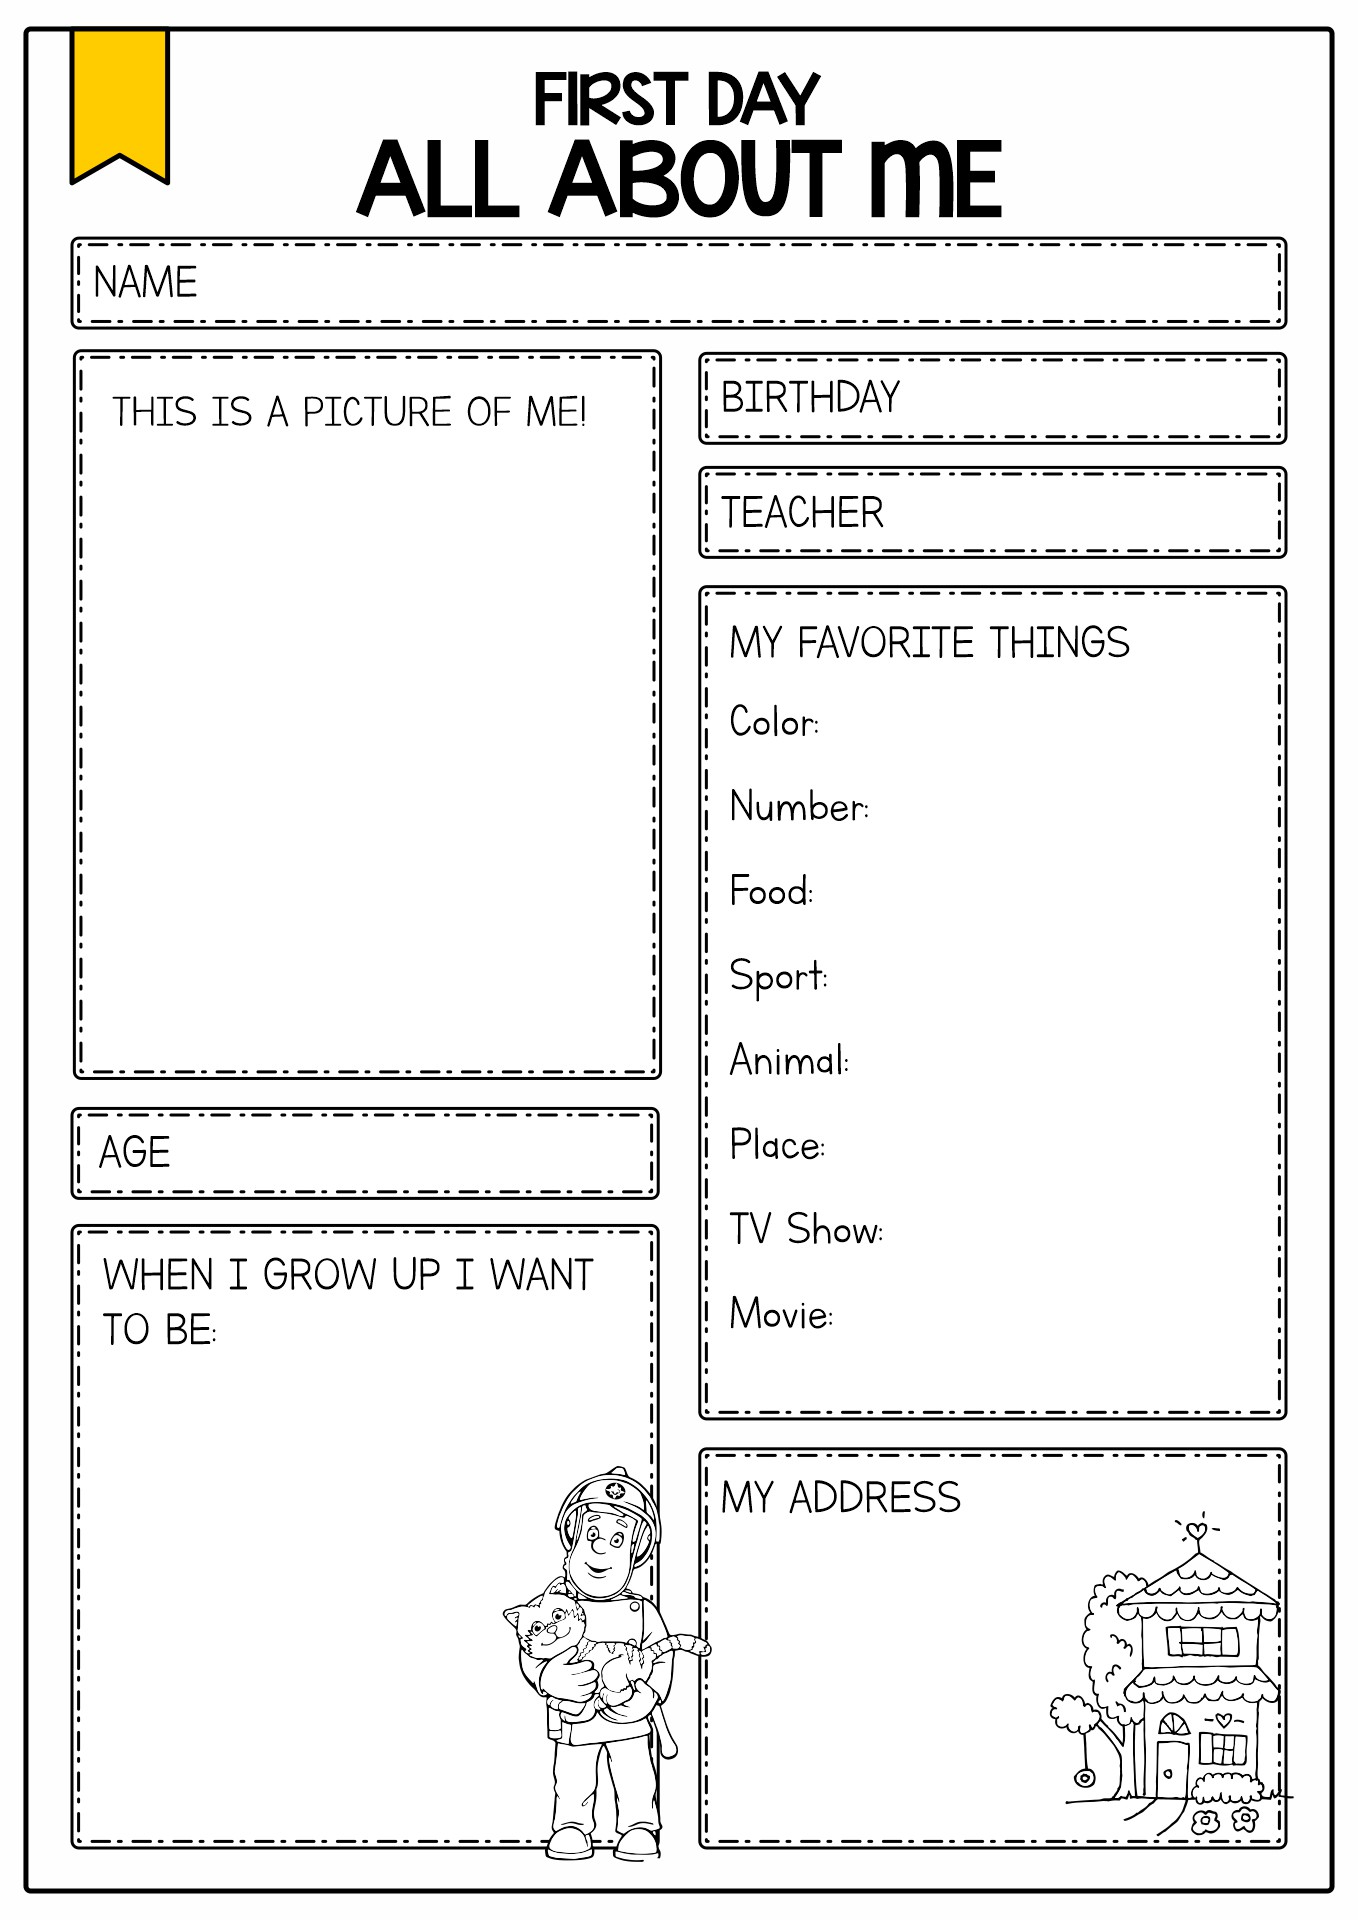 First Day All About Me Worksheet Image